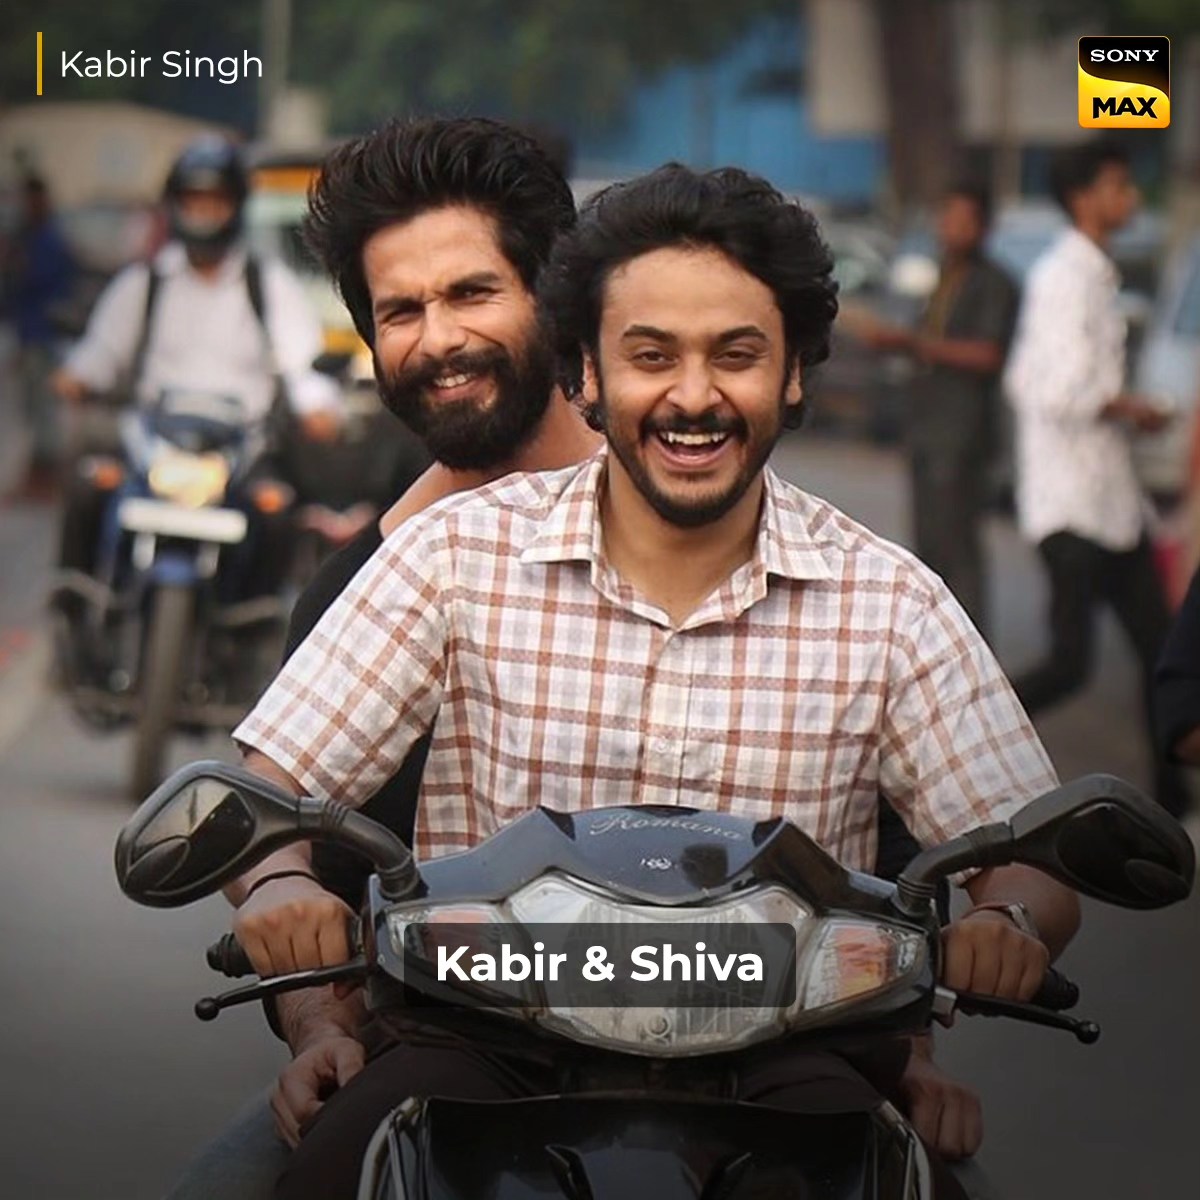 Manifesting a friendship like theirs <3

Catch #Bollywood blockbusters like #3Idiots and  #KabirSingh only on #SonyMaxUK

#DeewanaBanaDe #Movies #AamirKhan #ShahidKapoor